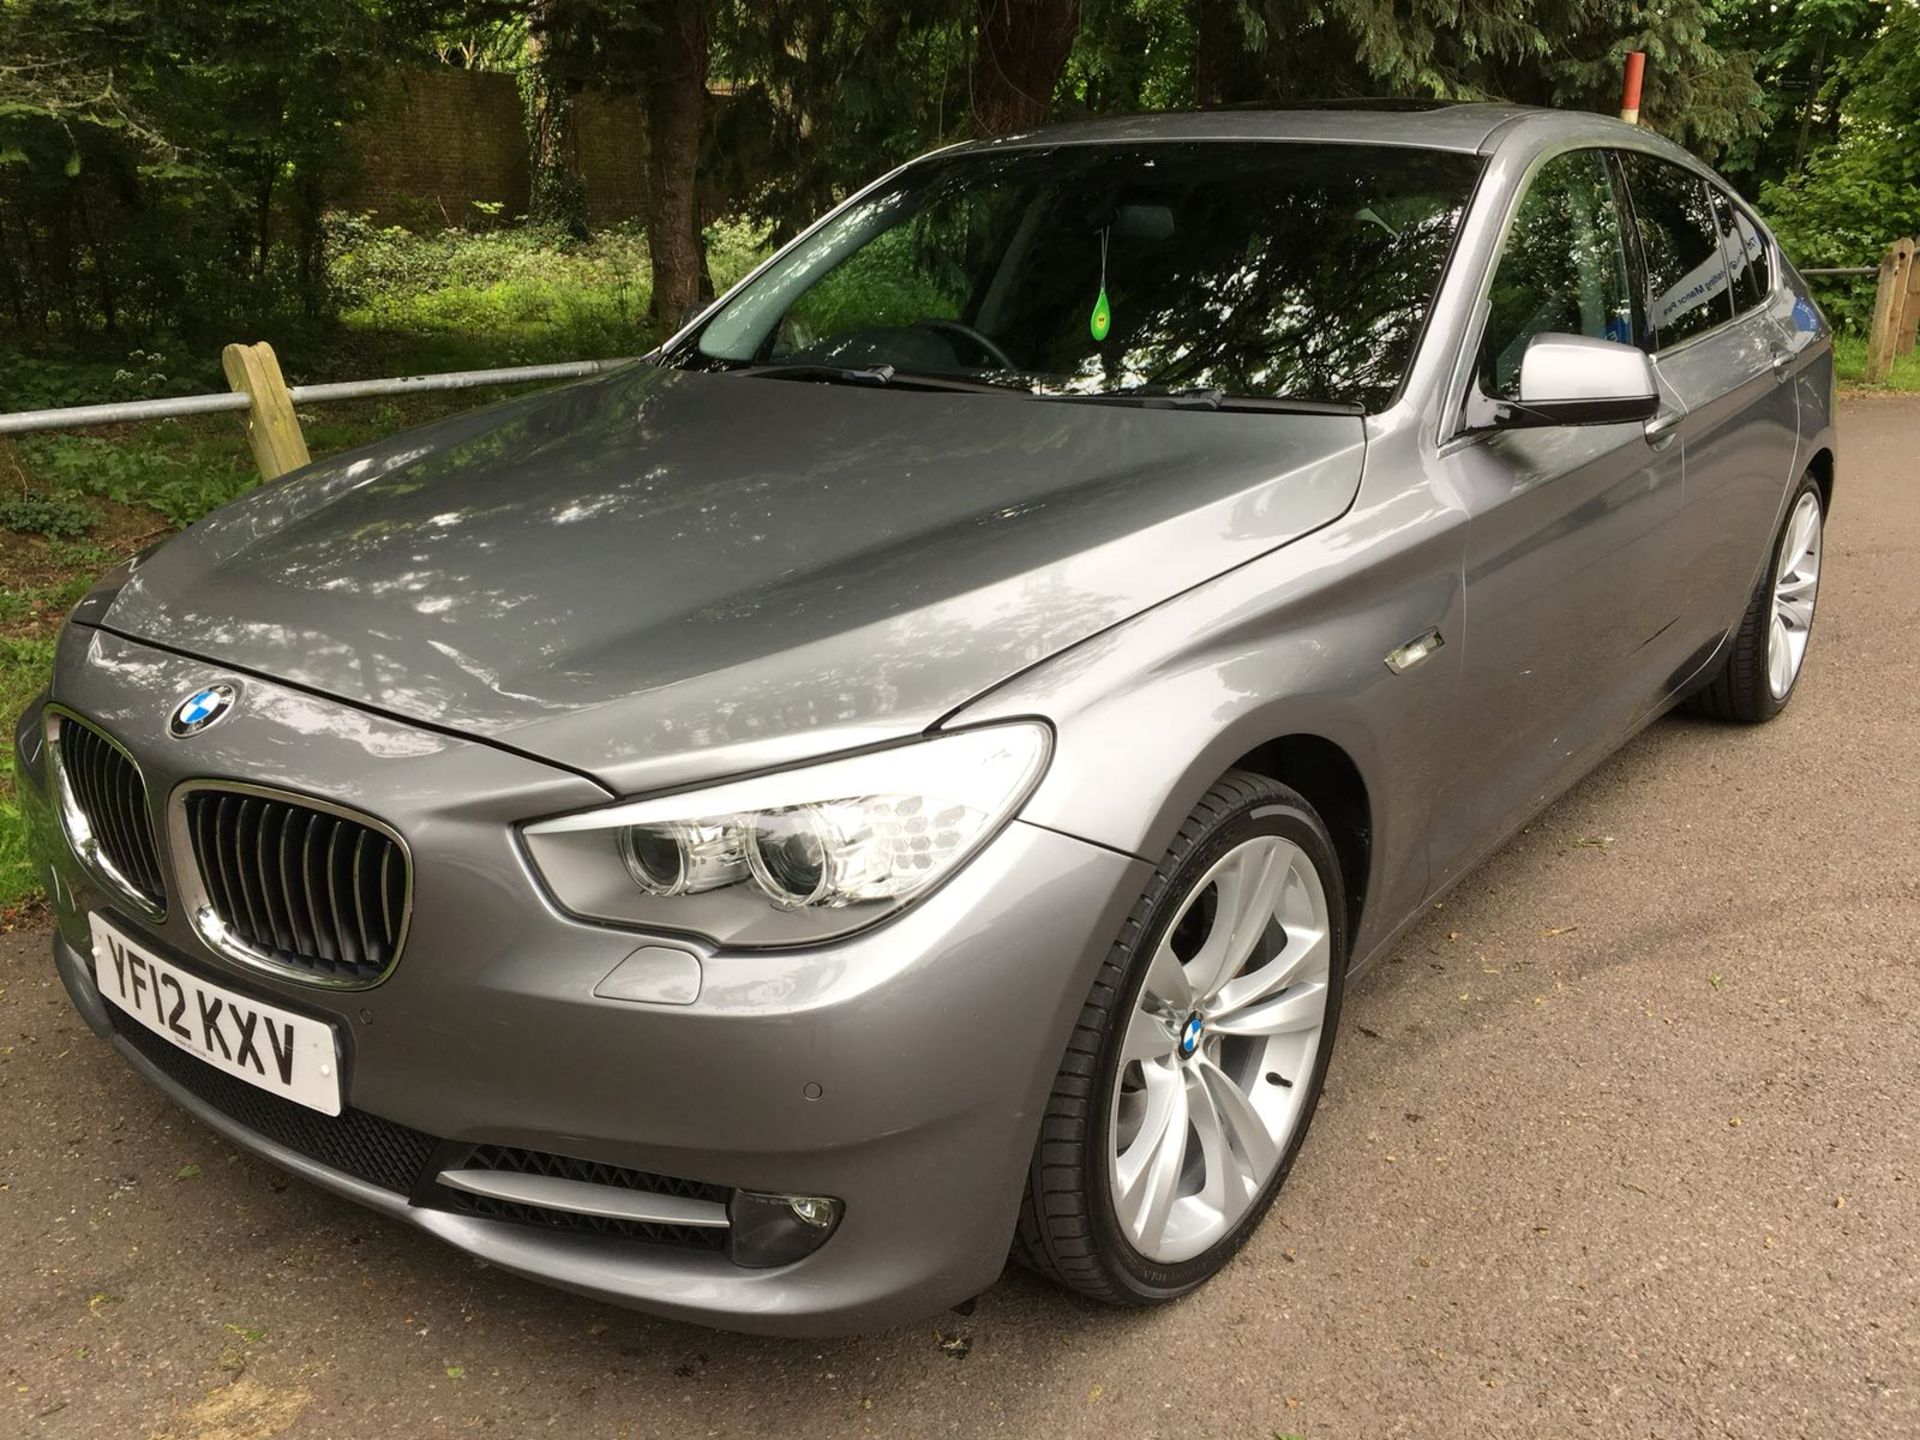 BMW 535D GT Gran Turismo 2012/12. 57,000 Miles. Automatic Gearbox - Image 3 of 19